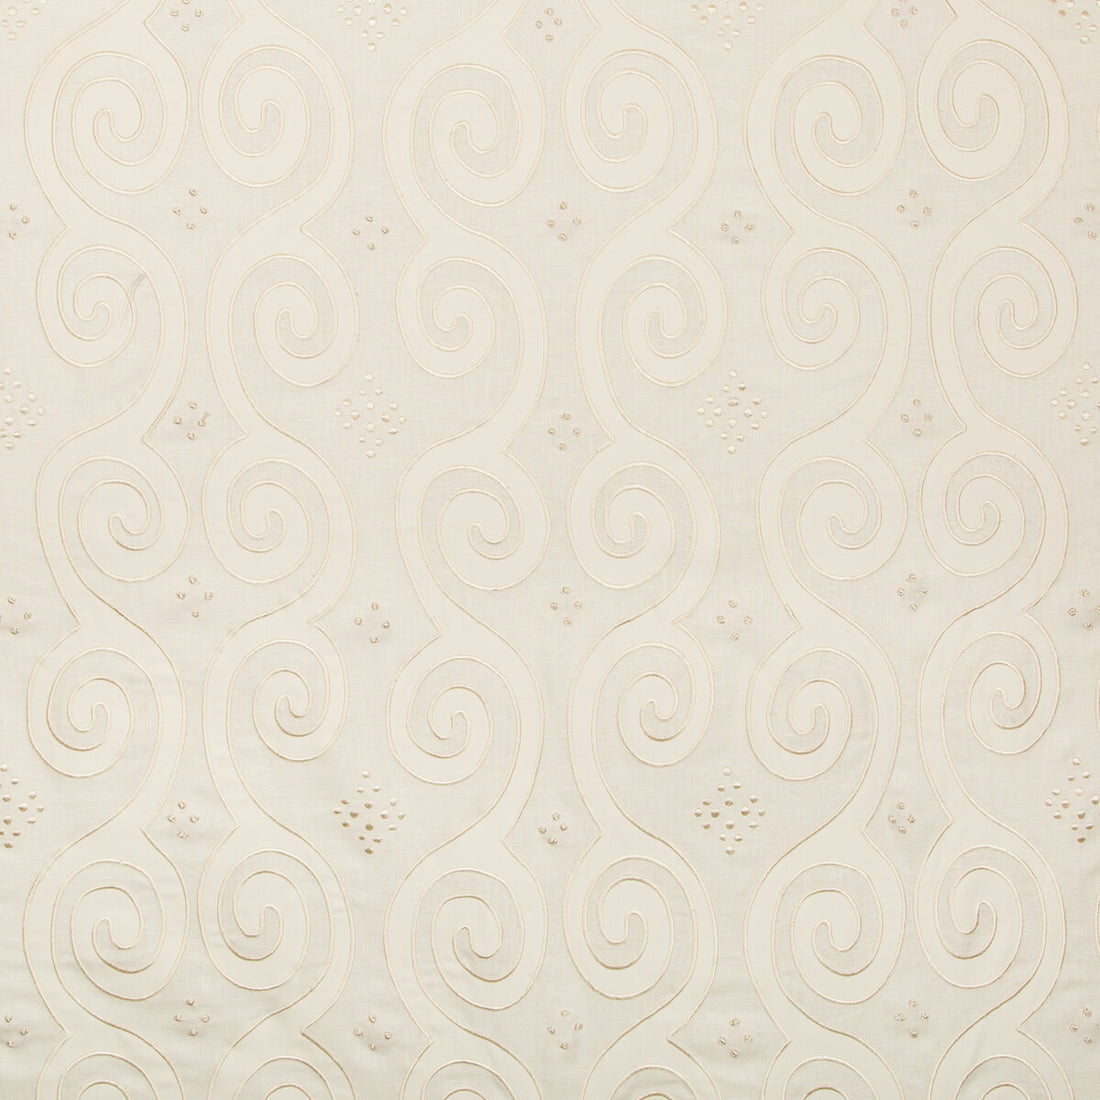 Serevan fabric in cream color - pattern 2019152.1.0 - by Lee Jofa in the Carrier And Company collection